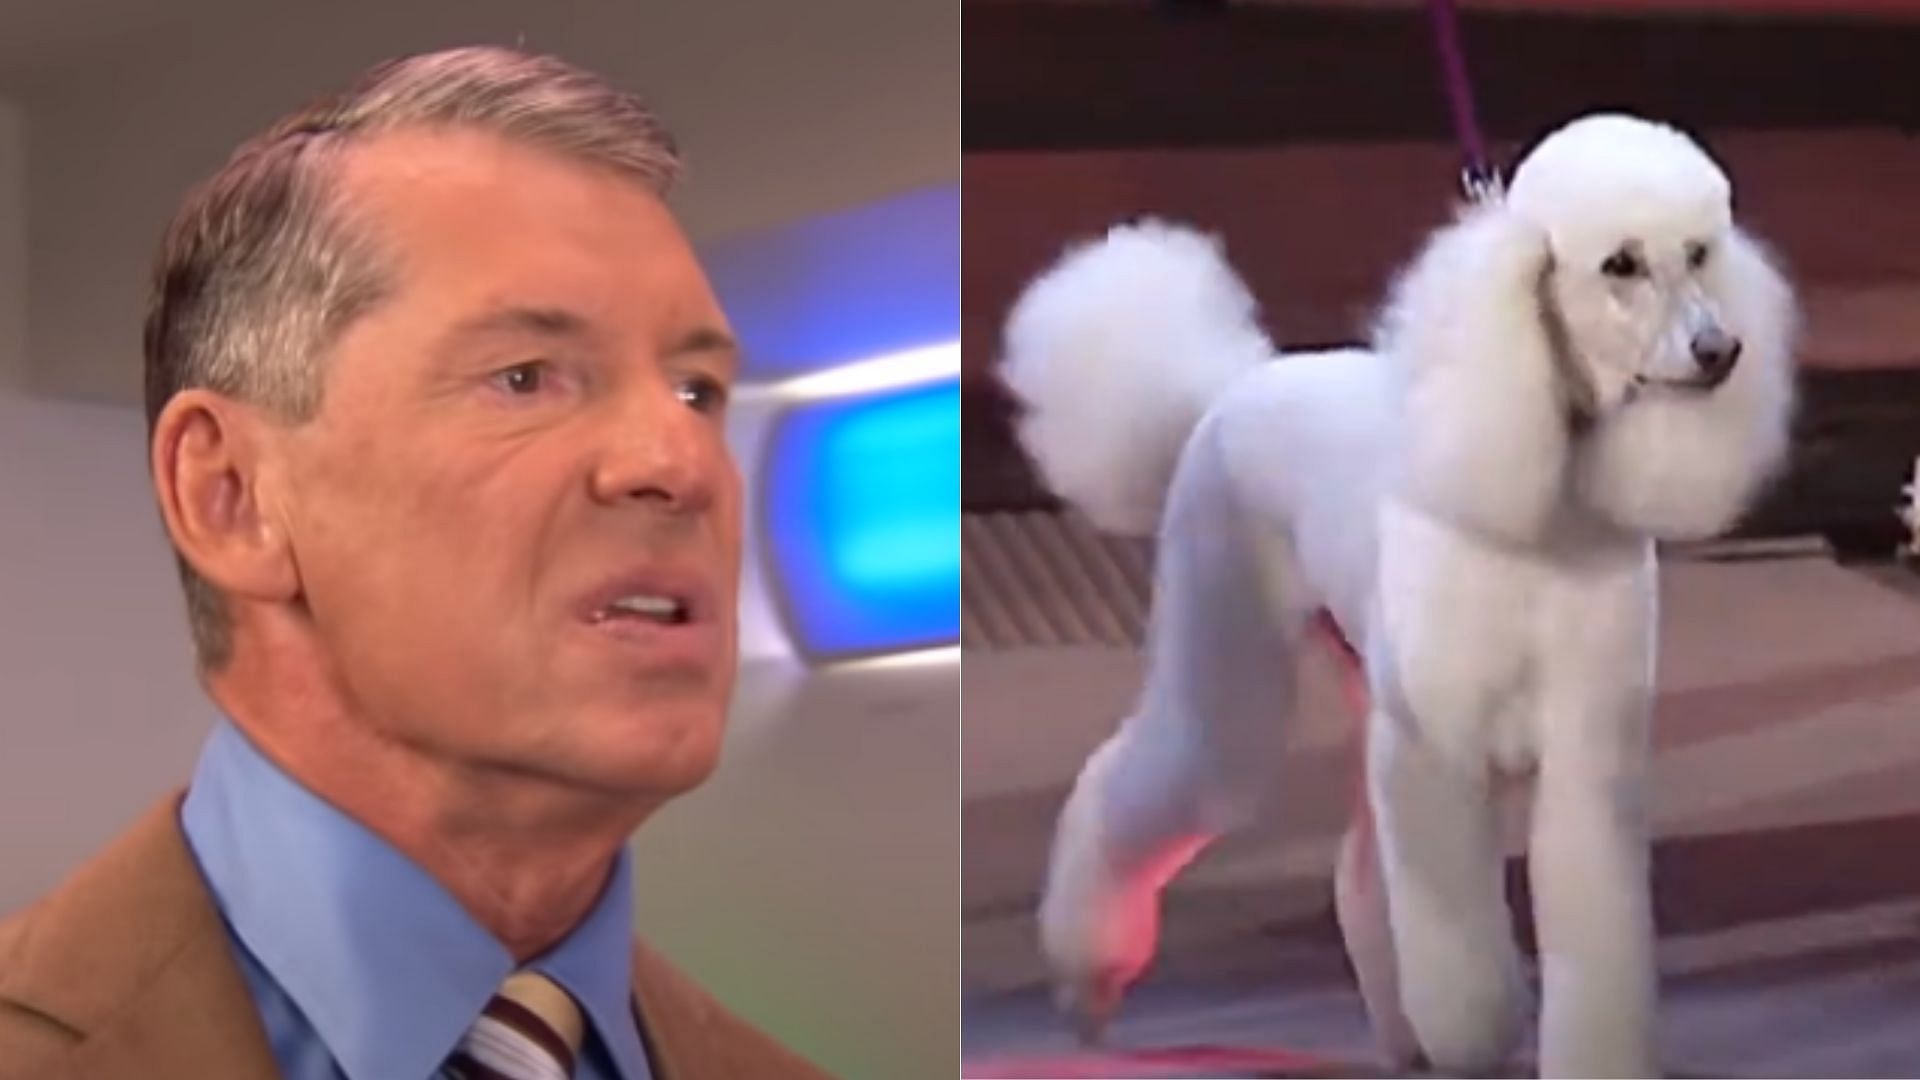 WWE Chairman Vince McMahon removed Fifi from television